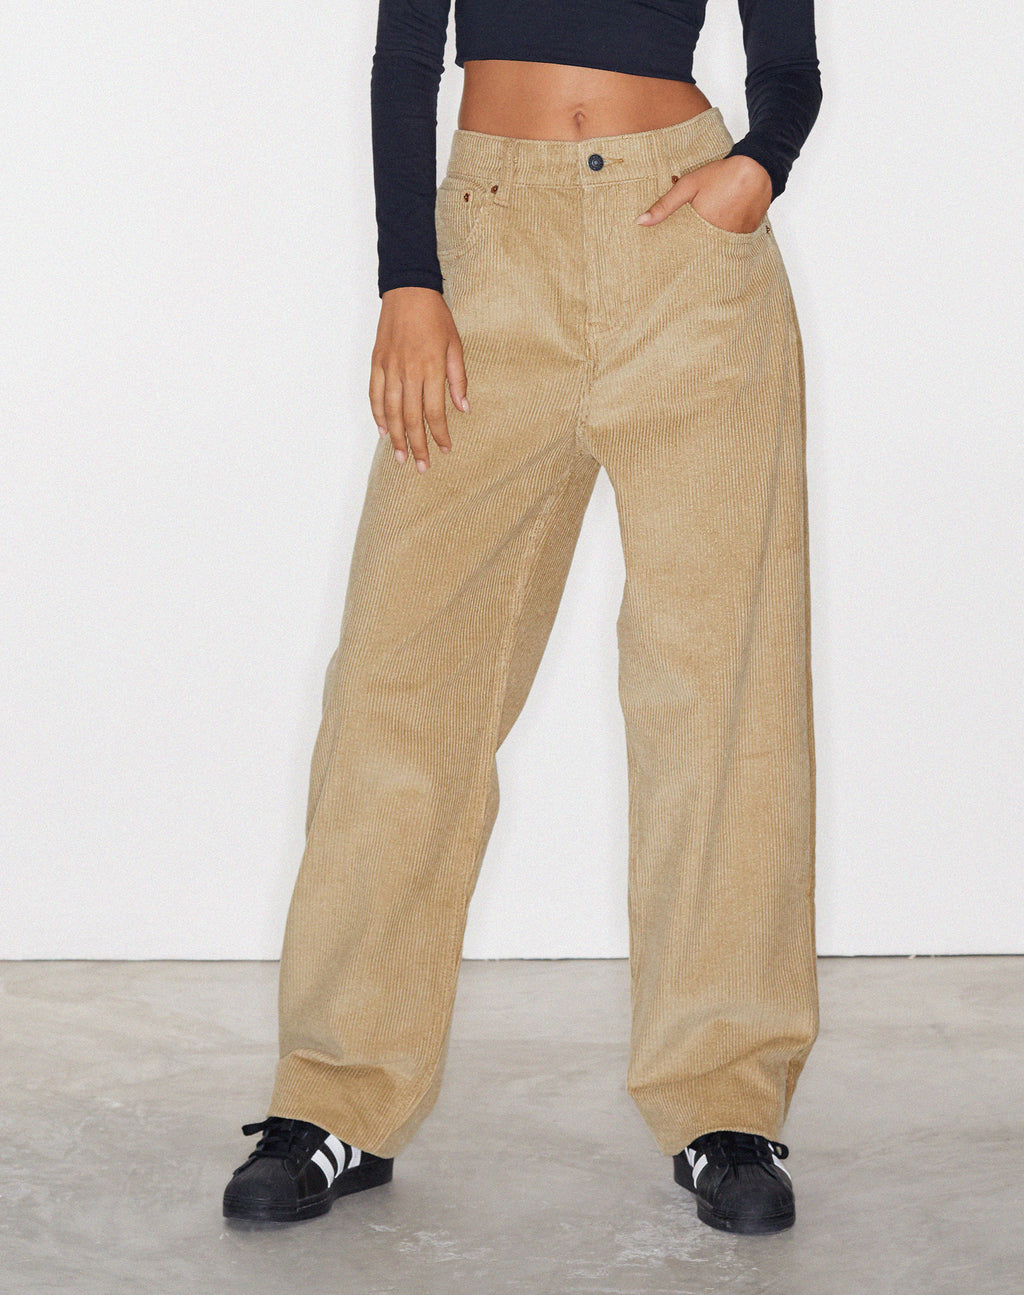 Parallel Jeans in Cord Sand